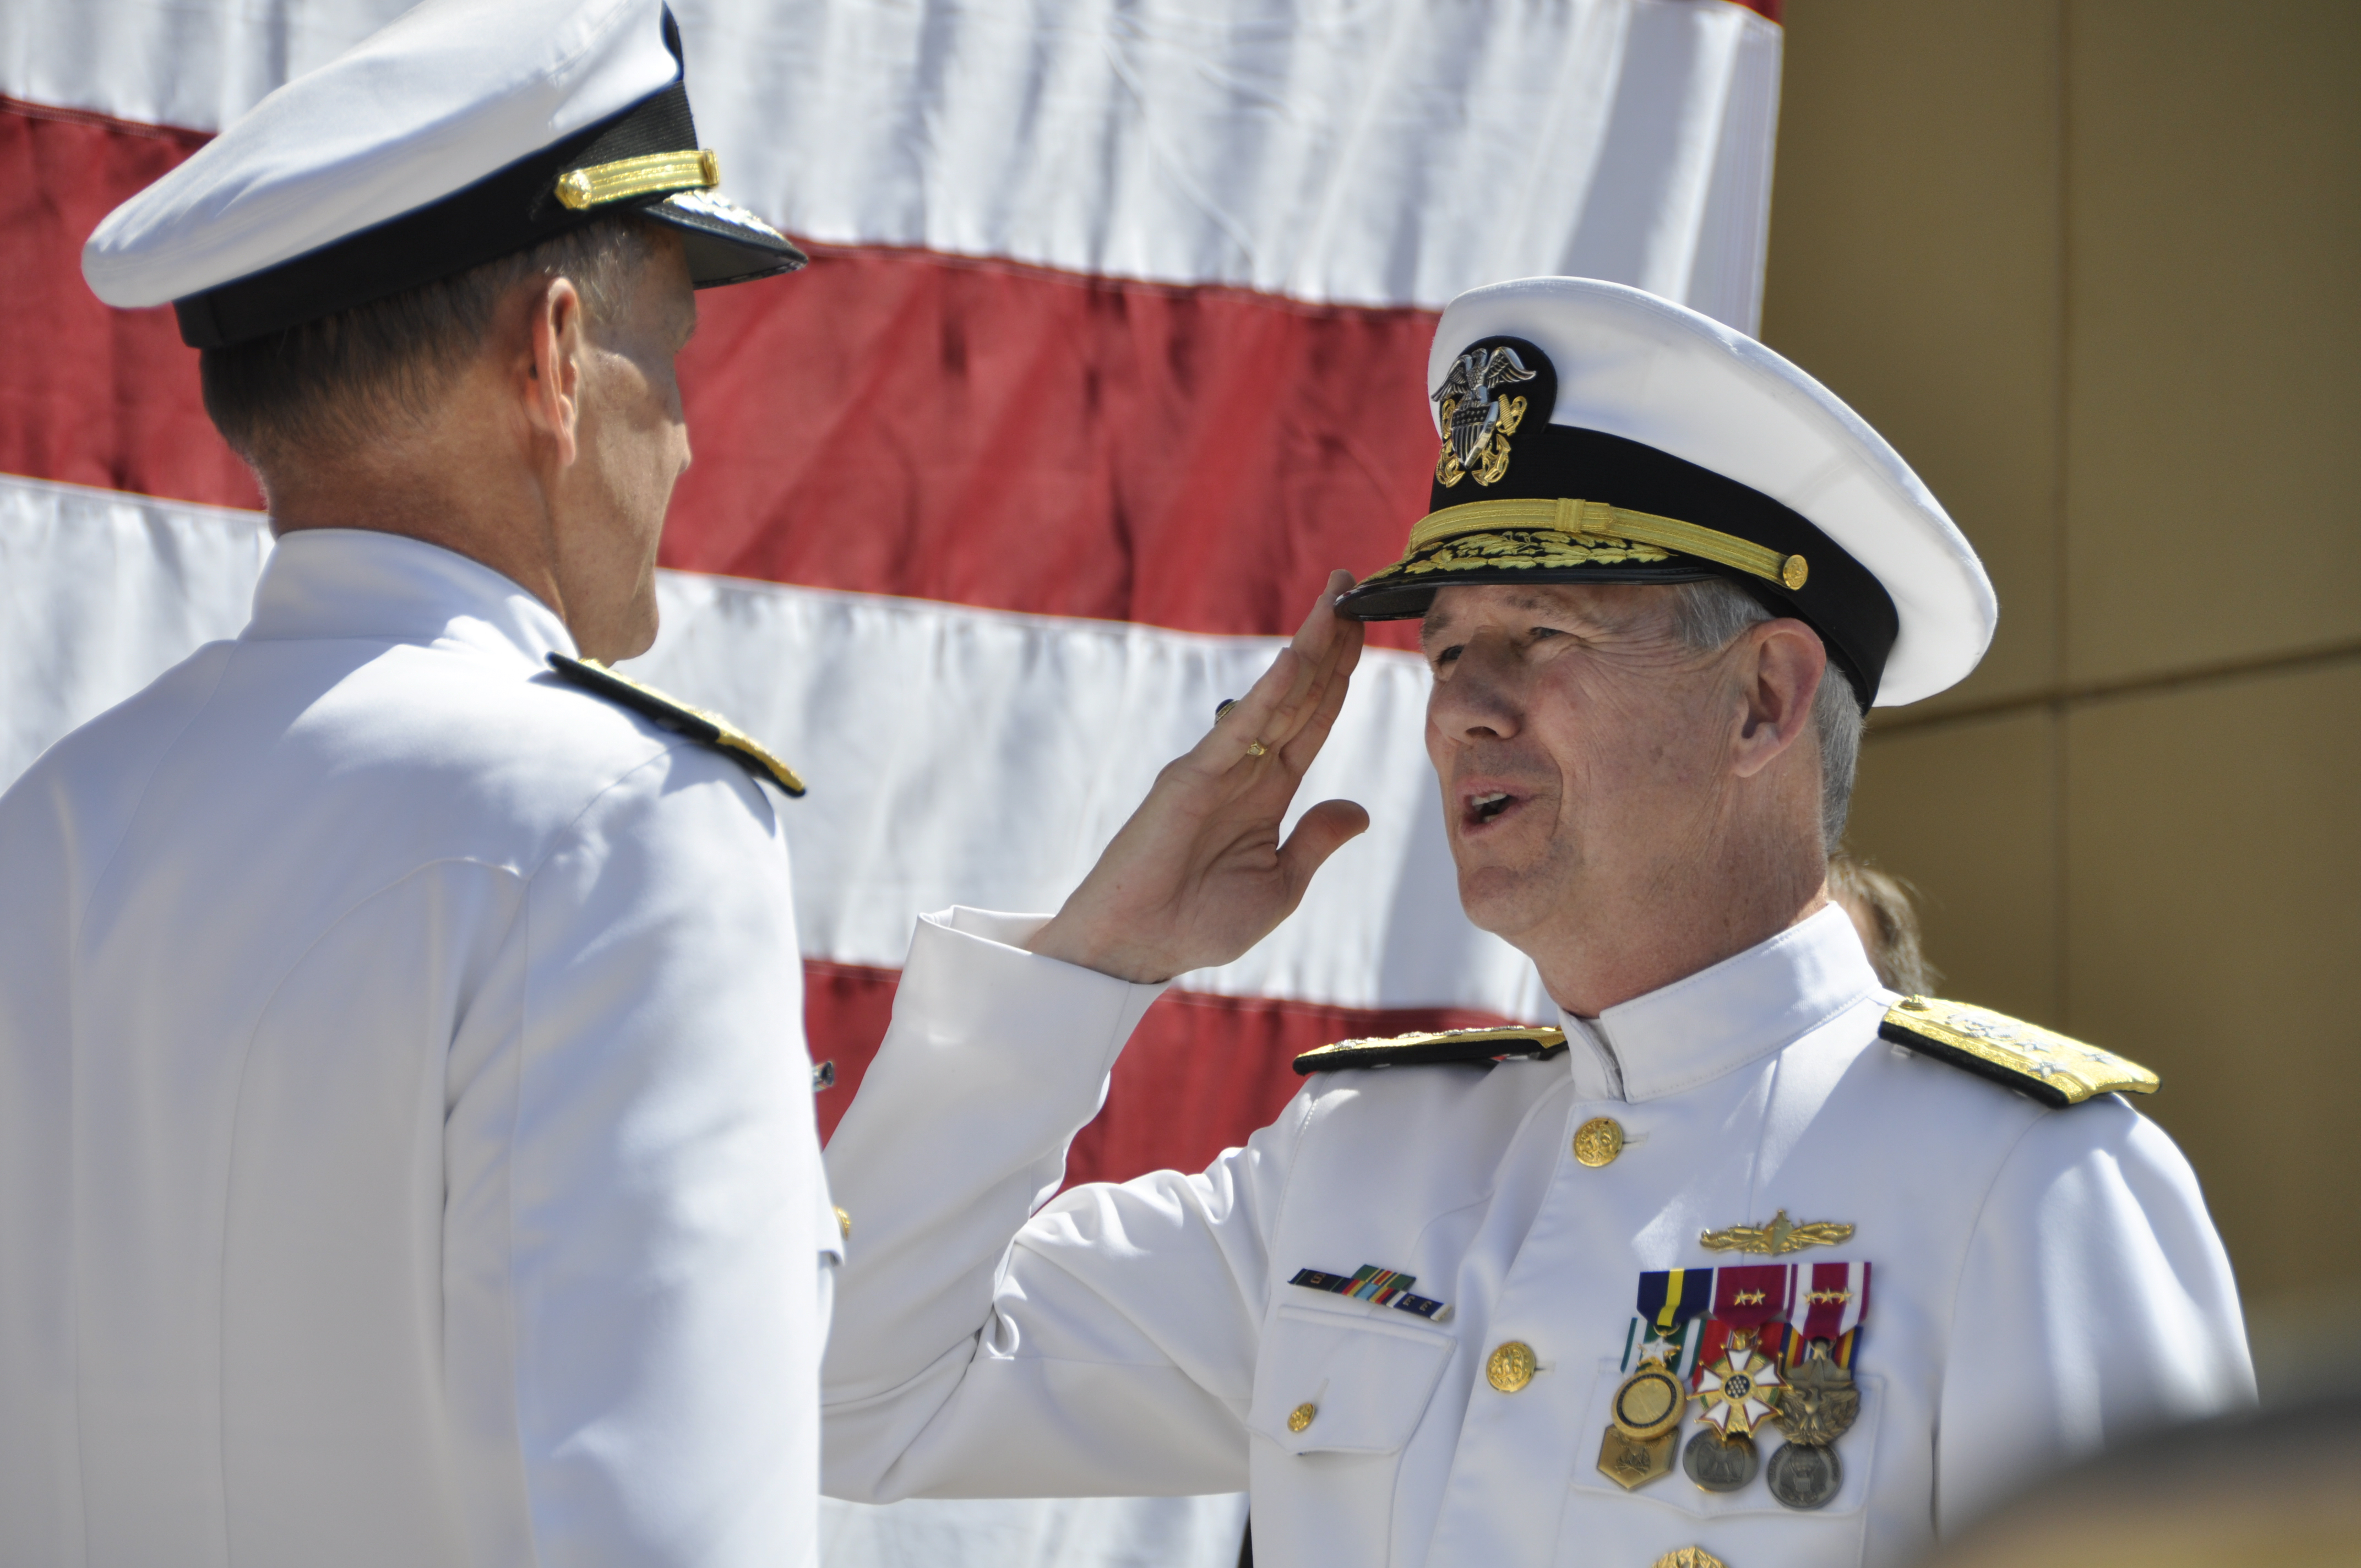 Vice Adm. Thomas Moore (right) relieves Vice Adm. William Hilarides as commander, Naval Sea Systems Command (NAVSEA) during a change of command ceremony today at the Washington Navy Yard. US Navy photo.